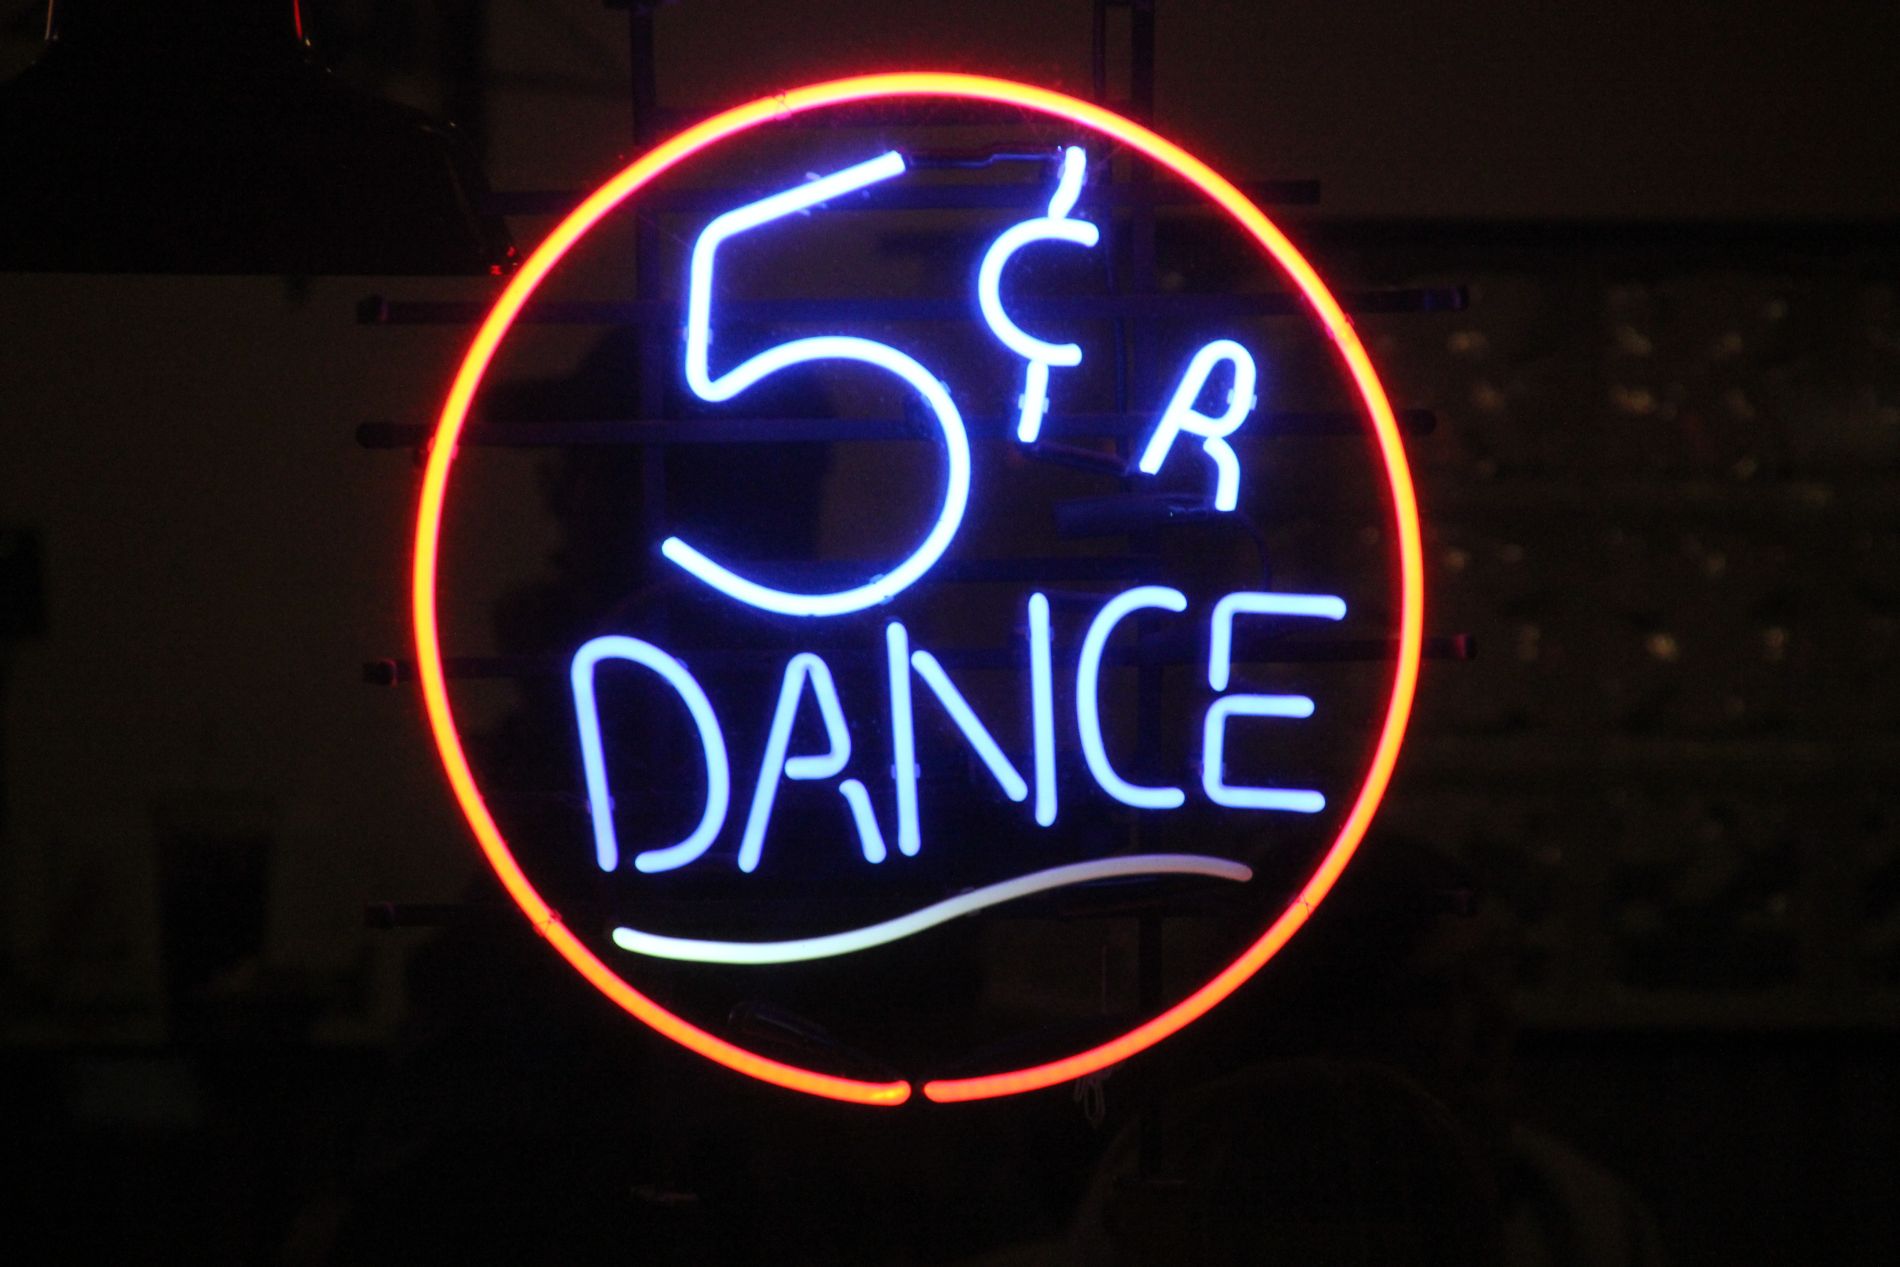 5c A Dance sign at That 50